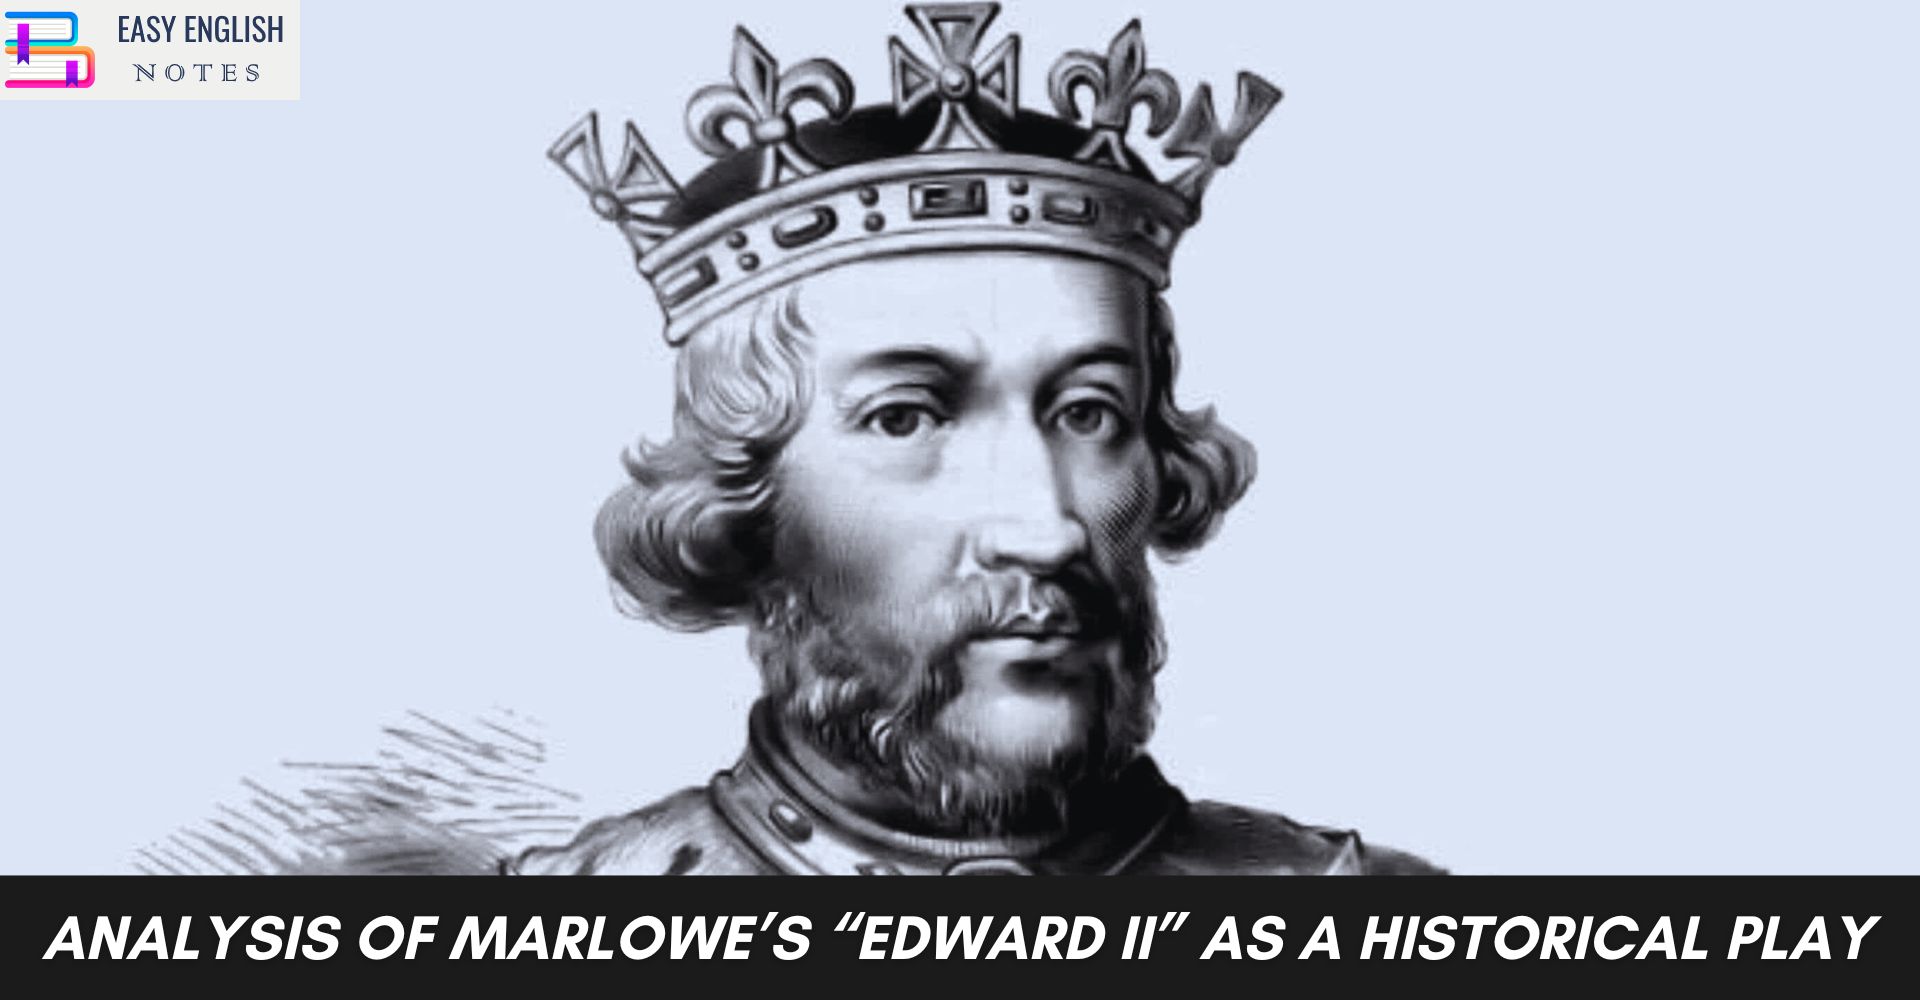 Analysis Of Marlowe’s “Edward II” as a Historical Play